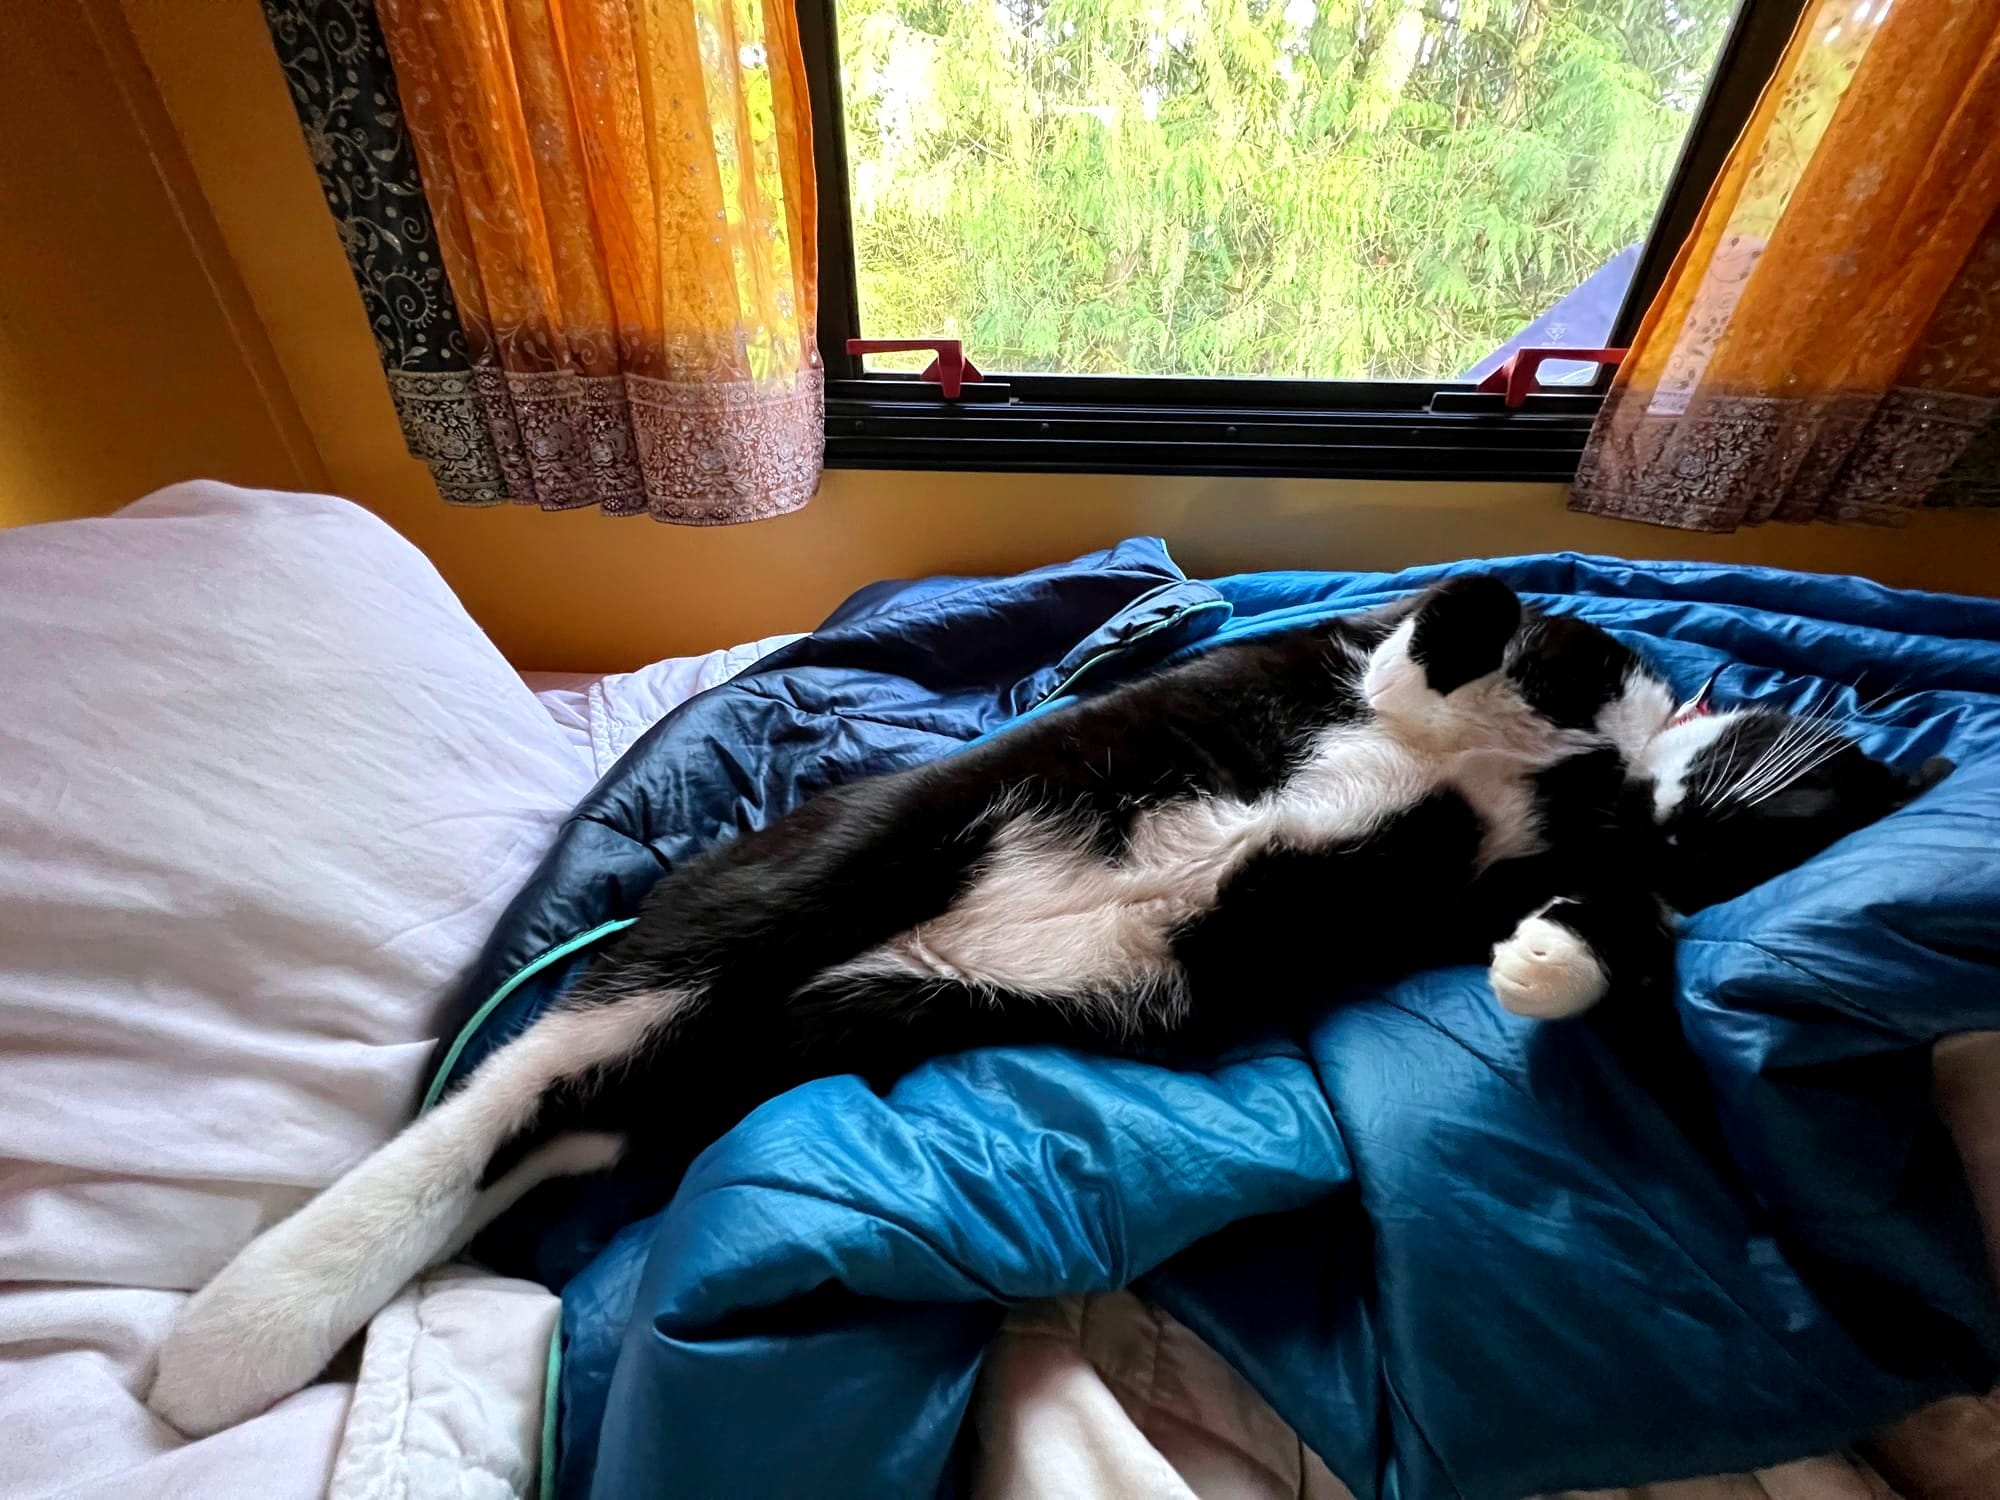 The same cat lying back with his stomach exposed, on a blue blanket under a window framed by gold drapes.